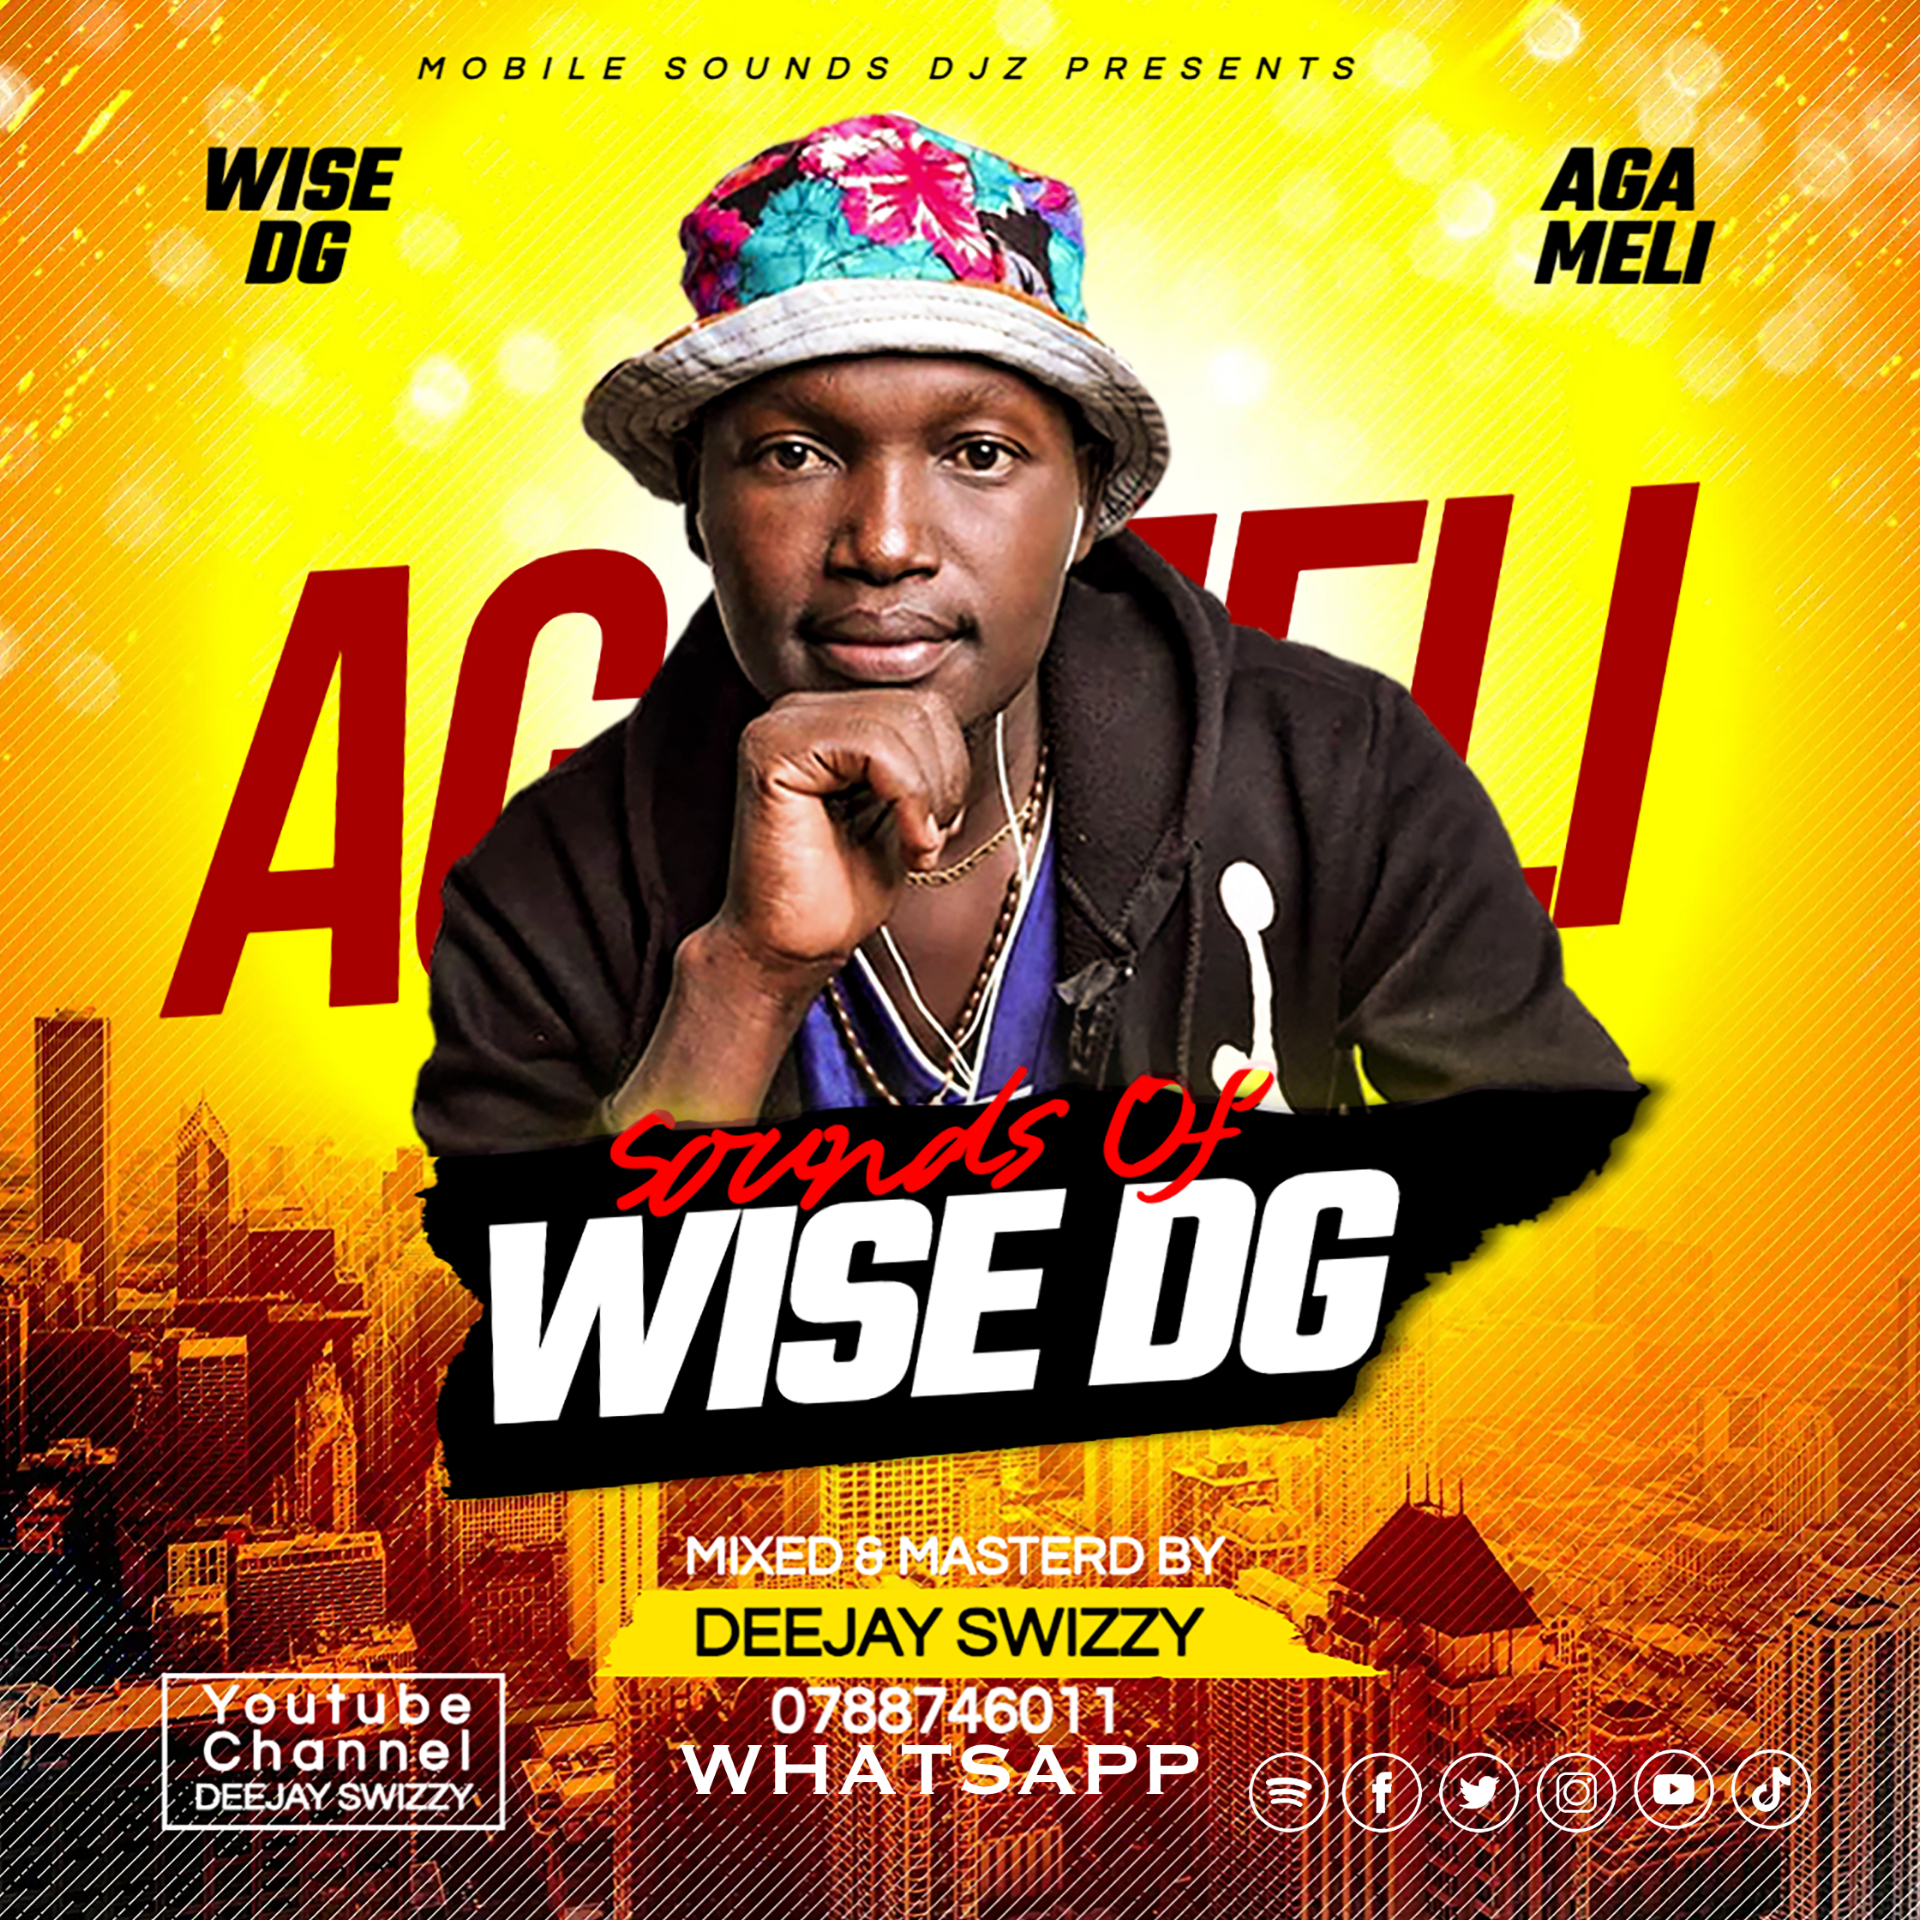 Sounds Of Wise DG Agameli